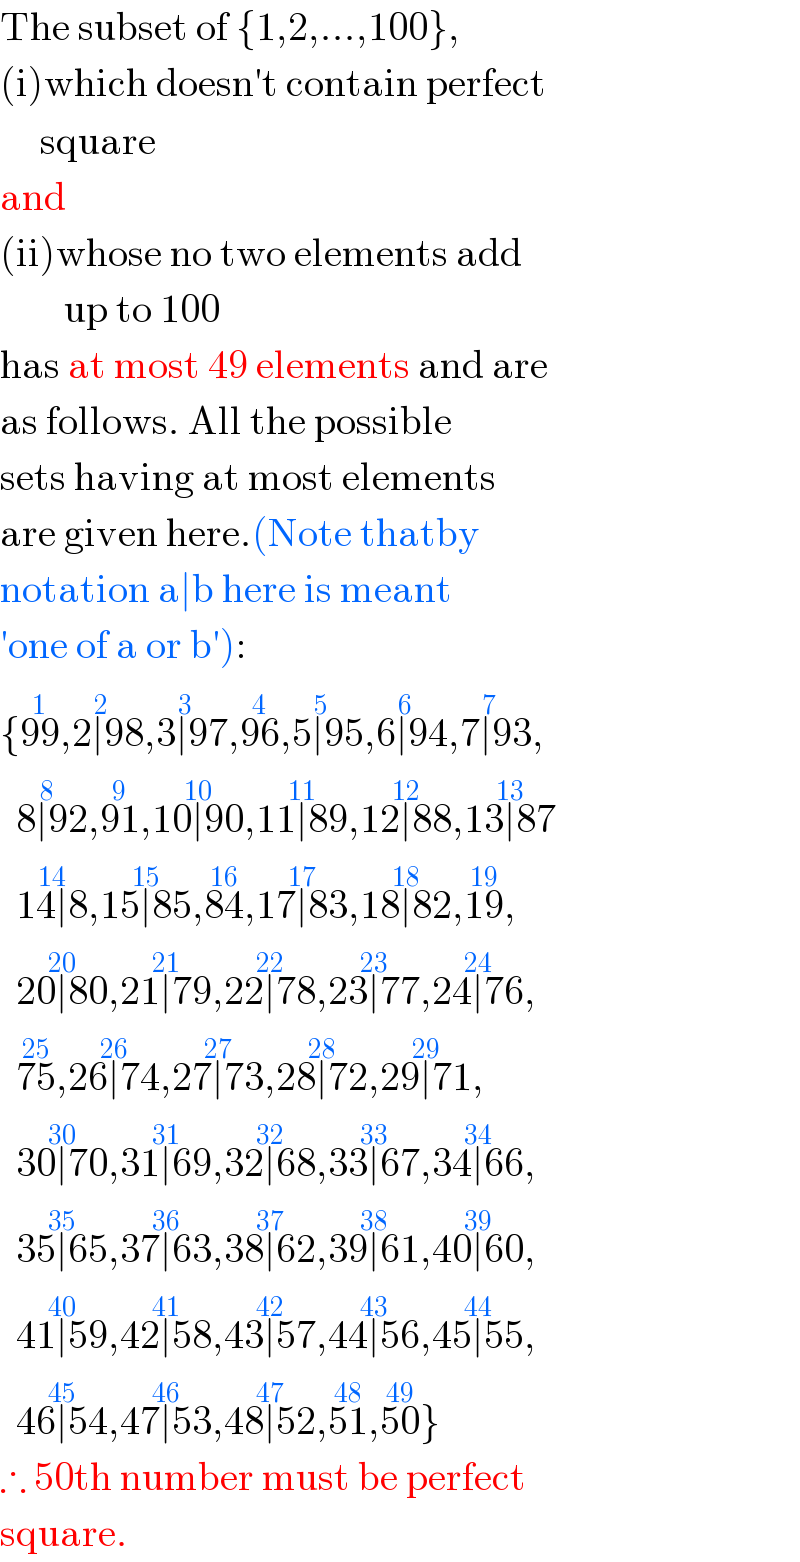 The subset of {1,2,...,100},  (i)which doesn′t contain perfect       square  and  (ii)whose no two elements add          up to 100  has at most 49 elements and are  as follows. All the possible   sets having at most elements  are given here.(Note thatby   notation a∣b here is meant   ′one of a or b′):  {99^(1) ,2∣98^(2) ,3∣97^(3) ,96^(4) ,5∣95^(5) ,6∣94^(6) ,7∣93^(7) ,    8∣92^(8) ,91^(9) ,10∣90^(10) ,11∣89^(11) ,12∣88^(12) ,13∣87^(13)     14∣8^(14) ,15∣85^(15) ,84^(16) ,17∣83^(17) ,18∣82^(18) ,19^(19) ,    20∣80^(20) ,21∣79^(21) ,22∣78^(22) ,23∣77^(23) ,24∣76^(24) ,    75^(25) ,26∣74^(26) ,27∣73^(27) ,28∣72^(28) ,29∣71^(29) ,    30∣70^(30) ,31∣69^(31) ,32∣68^(32) ,33∣67^(33) ,34∣66^(34) ,    35∣65^(35) ,37∣63^(36) ,38∣62^(37) ,39∣61^(38) ,40∣60^(39) ,    41∣59^(40) ,42∣58^(41) ,43∣57^(42) ,44∣56^(43) ,45∣55^(44) ,    46∣54^(45) ,47∣53^(46) ,48∣52^(47) ,51^(48) ,50^(49) }  ∴ 50th number must be perfect  square.  